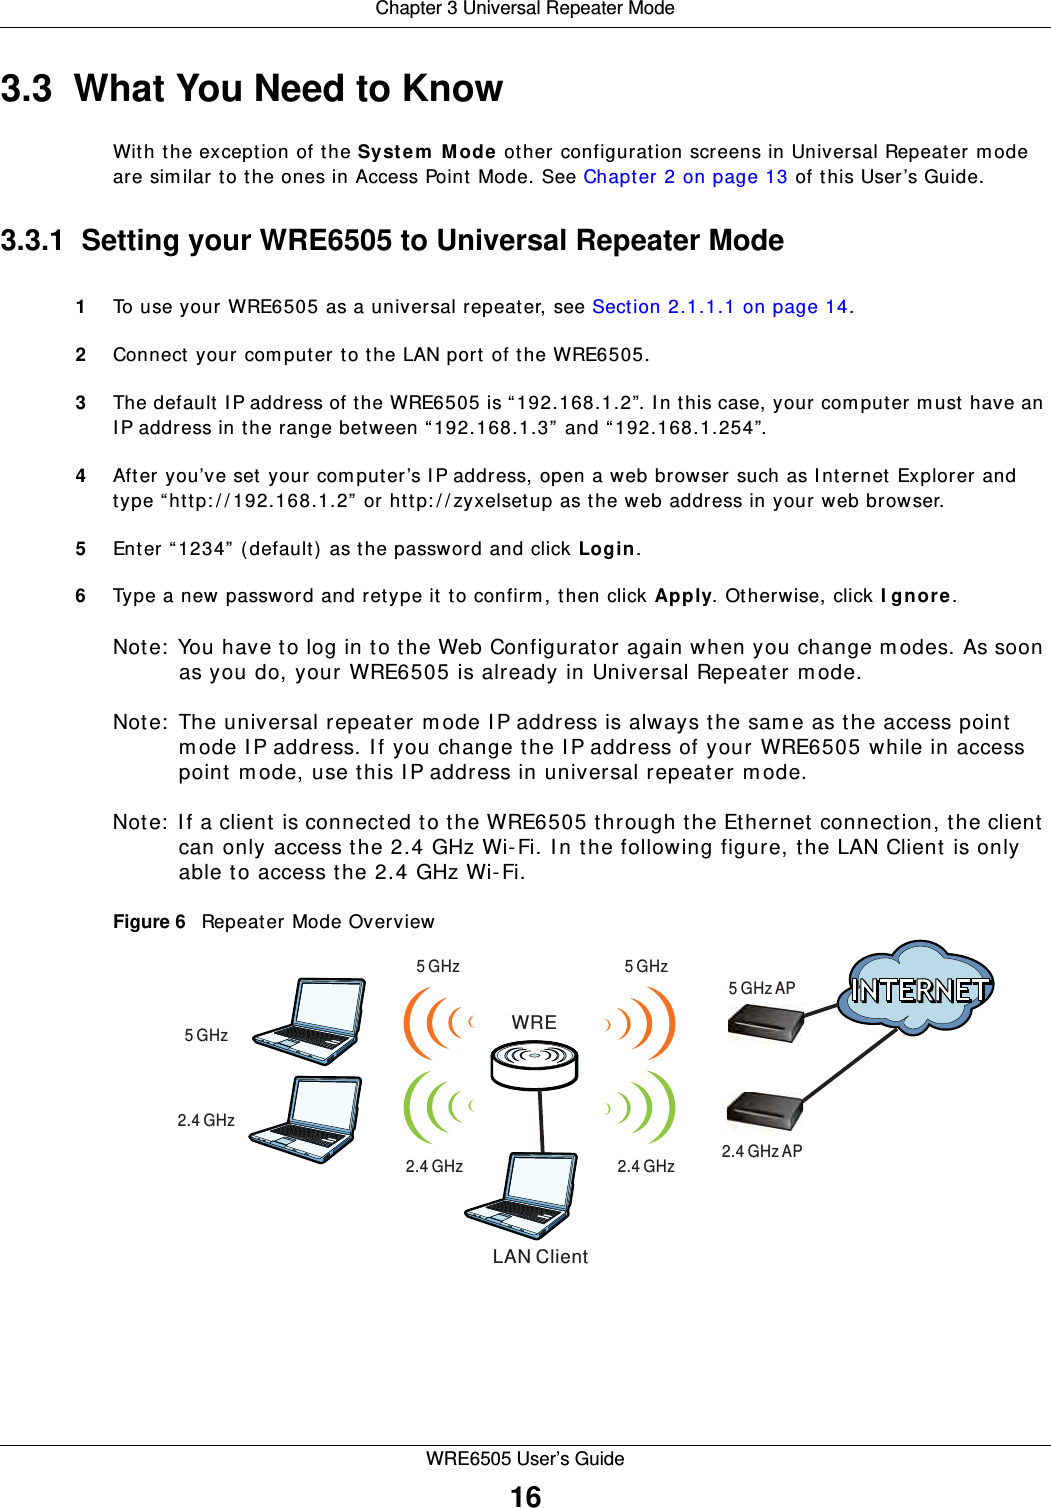 Chapter 3 Universal Repeater ModeWRE6505 User’s Guide163.3  What You Need to KnowWith the exception of the Syst em  M ode other configuration screens in Universal Repeater m ode are similar to the ones in Access Point Mode. See Chapter 2 on page 13 of this User’s Guide.3.3.1  Setting your WRE6505 to Universal Repeater Mode1To use your WRE6505 as a universal repeater, see Section 2.1.1.1 on page 14.2Connect your computer to the LAN port of the WRE6505. 3The default I P address of the WRE6505 is “192.168.1.2”. I n this case, your computer m ust have an IP address in the range between “ 192.168.1.3”  and “ 192.168.1.254”.4After you’ve set your computer’s I P address, open a web browser such as I nternet Explorer and type “http: / / 192.168.1.2”  or http: / / zyxelsetup as the web address in your web browser.5Enter “1234” (default) as the password and click Login.6Type a new password and retype it to confirm, then click Apply. Otherwise, click I gn ore.Note:  You have to log in to the Web Configurator again when you change modes. As soon as you do, your WRE6505 is already in Universal Repeater m ode.Note:  The universal repeater m ode I P address is always the same as the access point mode IP address. If you change the I P address of your WRE6505 while in access point m ode, use this I P address in universal repeater m ode. Note:  I f a client is connected to the WRE6505 through the Ethernet connection, the client can only access the 2.4 GHz Wi-Fi. I n the following figure, the LAN Client is only able to access the 2.4 GHz Wi-Fi.Figure 6   Repeater Mode Overview WRELAN Client5 GHz5 GHz AP5 GHz5 GHz2.4 GHz AP2.4 GHz2.4 GHz2.4 GHz